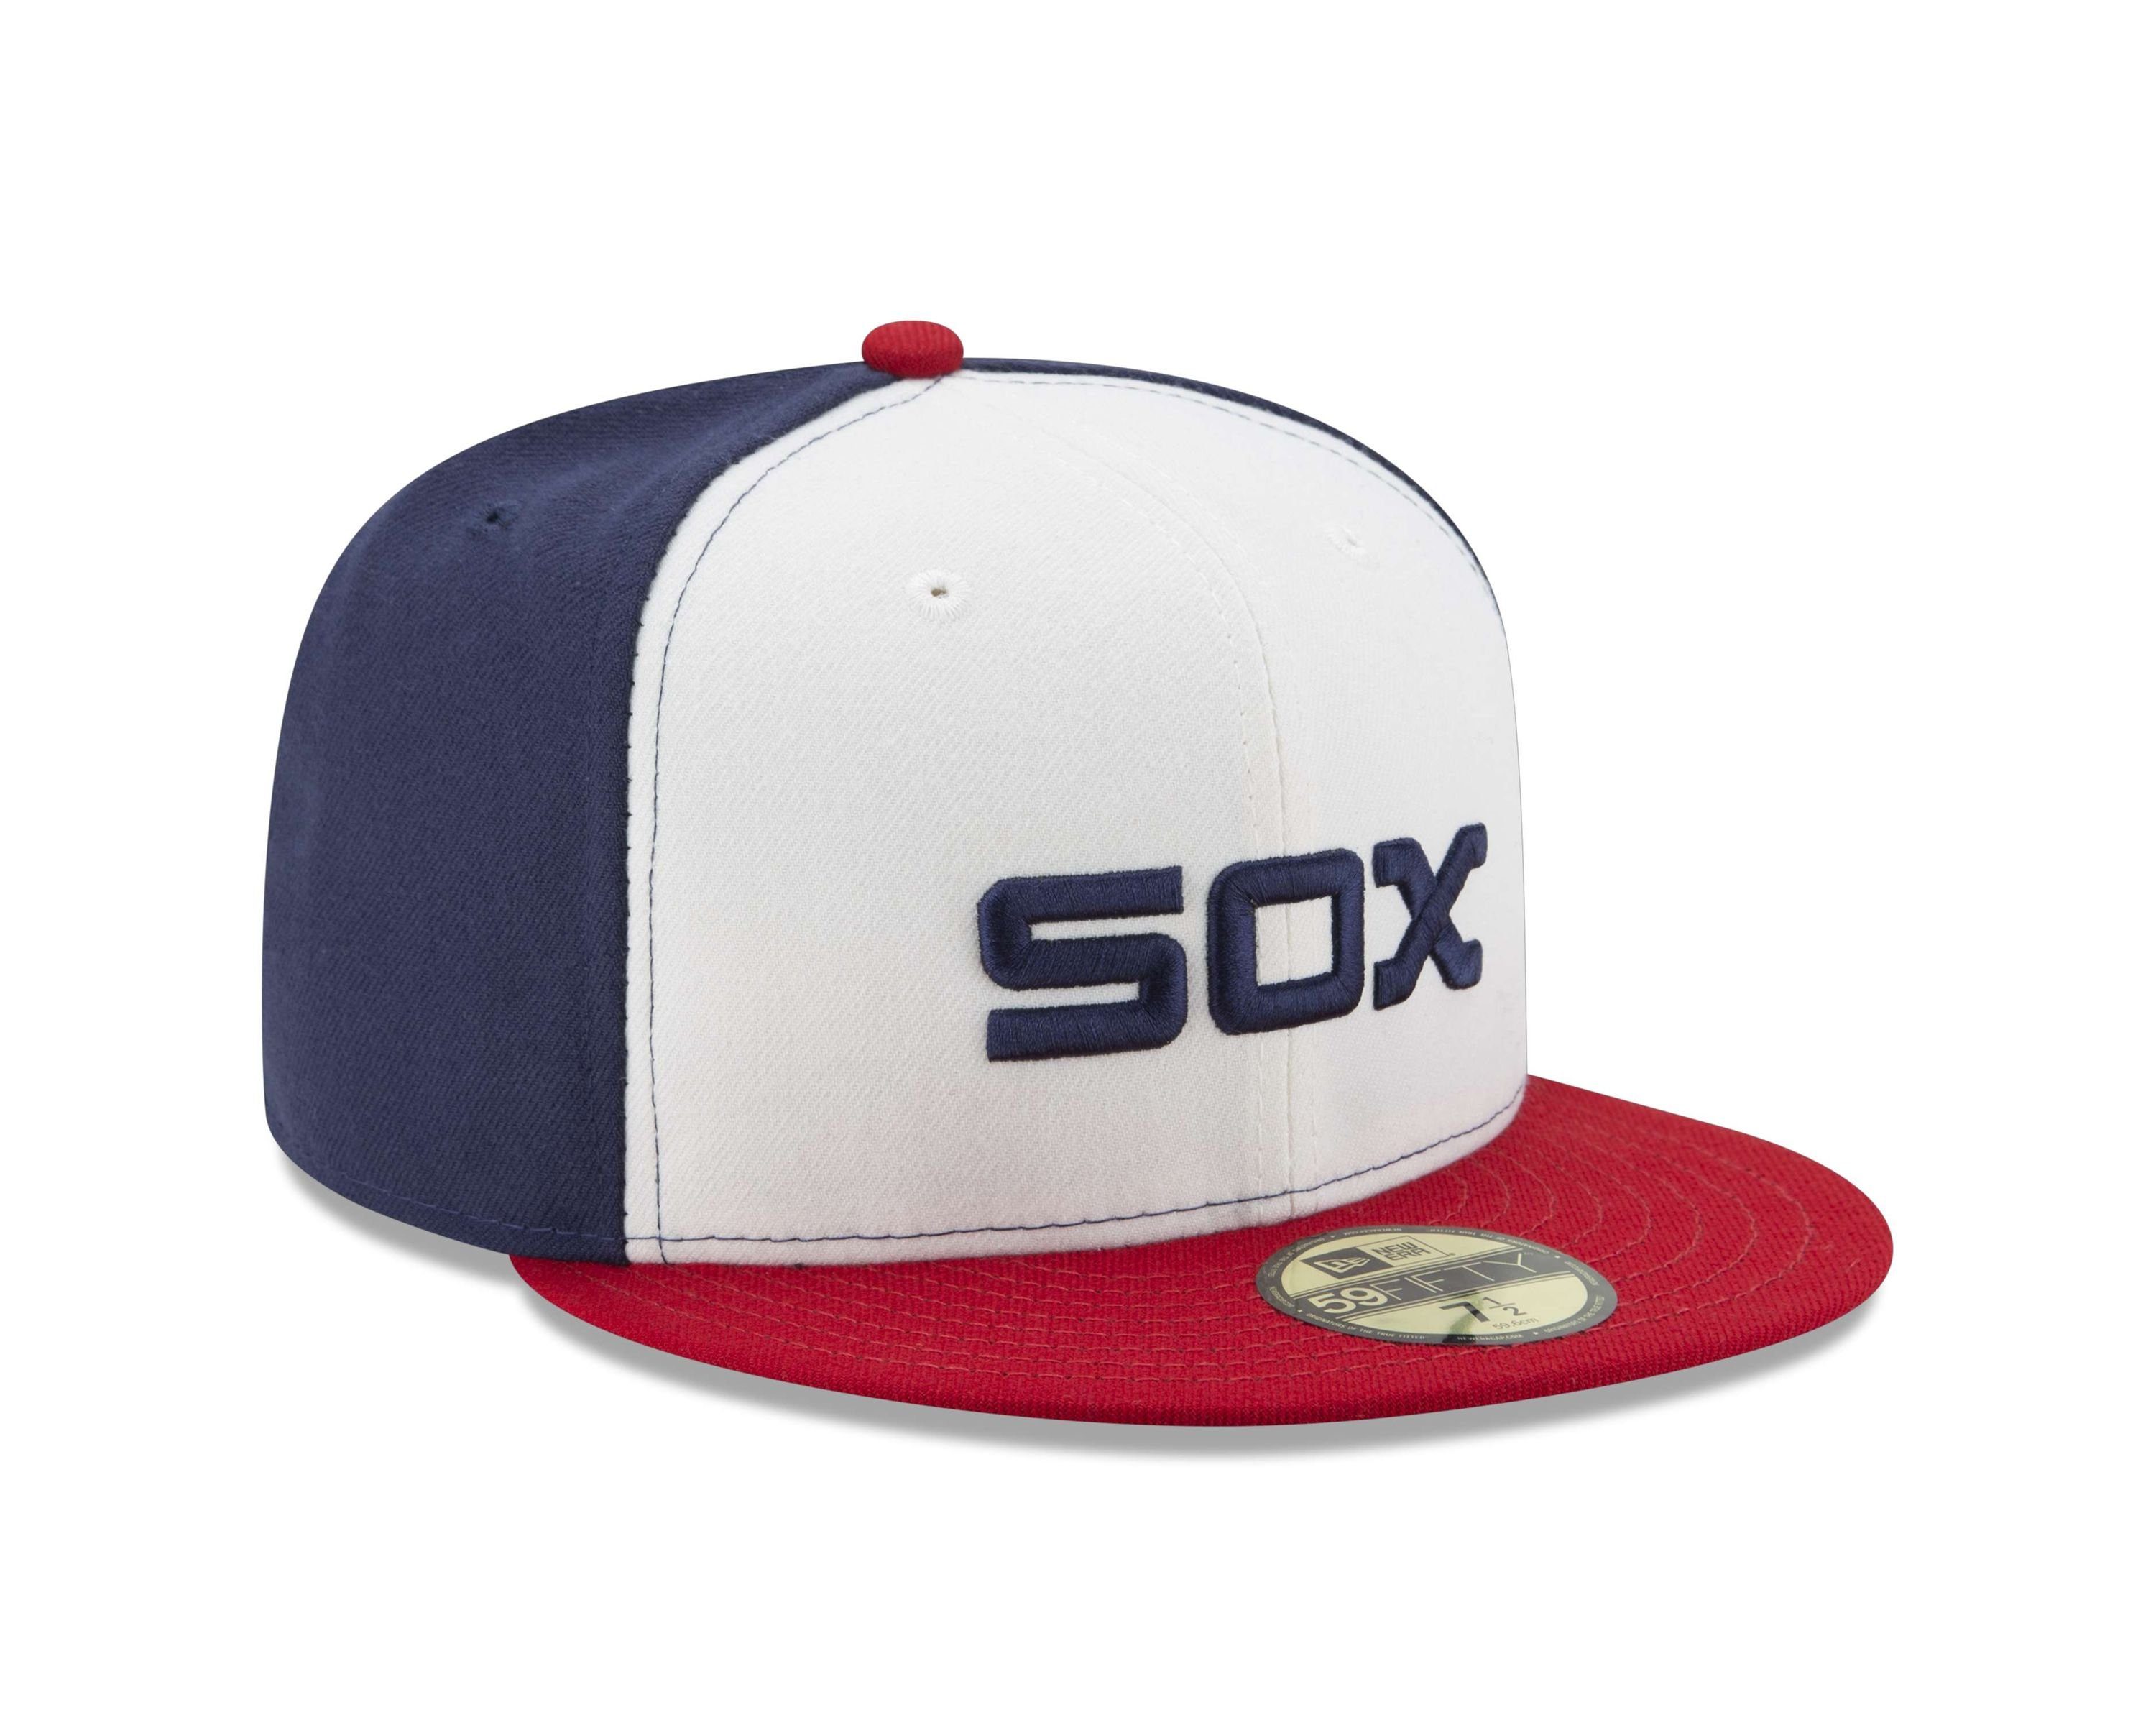 New Cap Collection Alt Sox Authentic MLB White Era Chicago Fitted